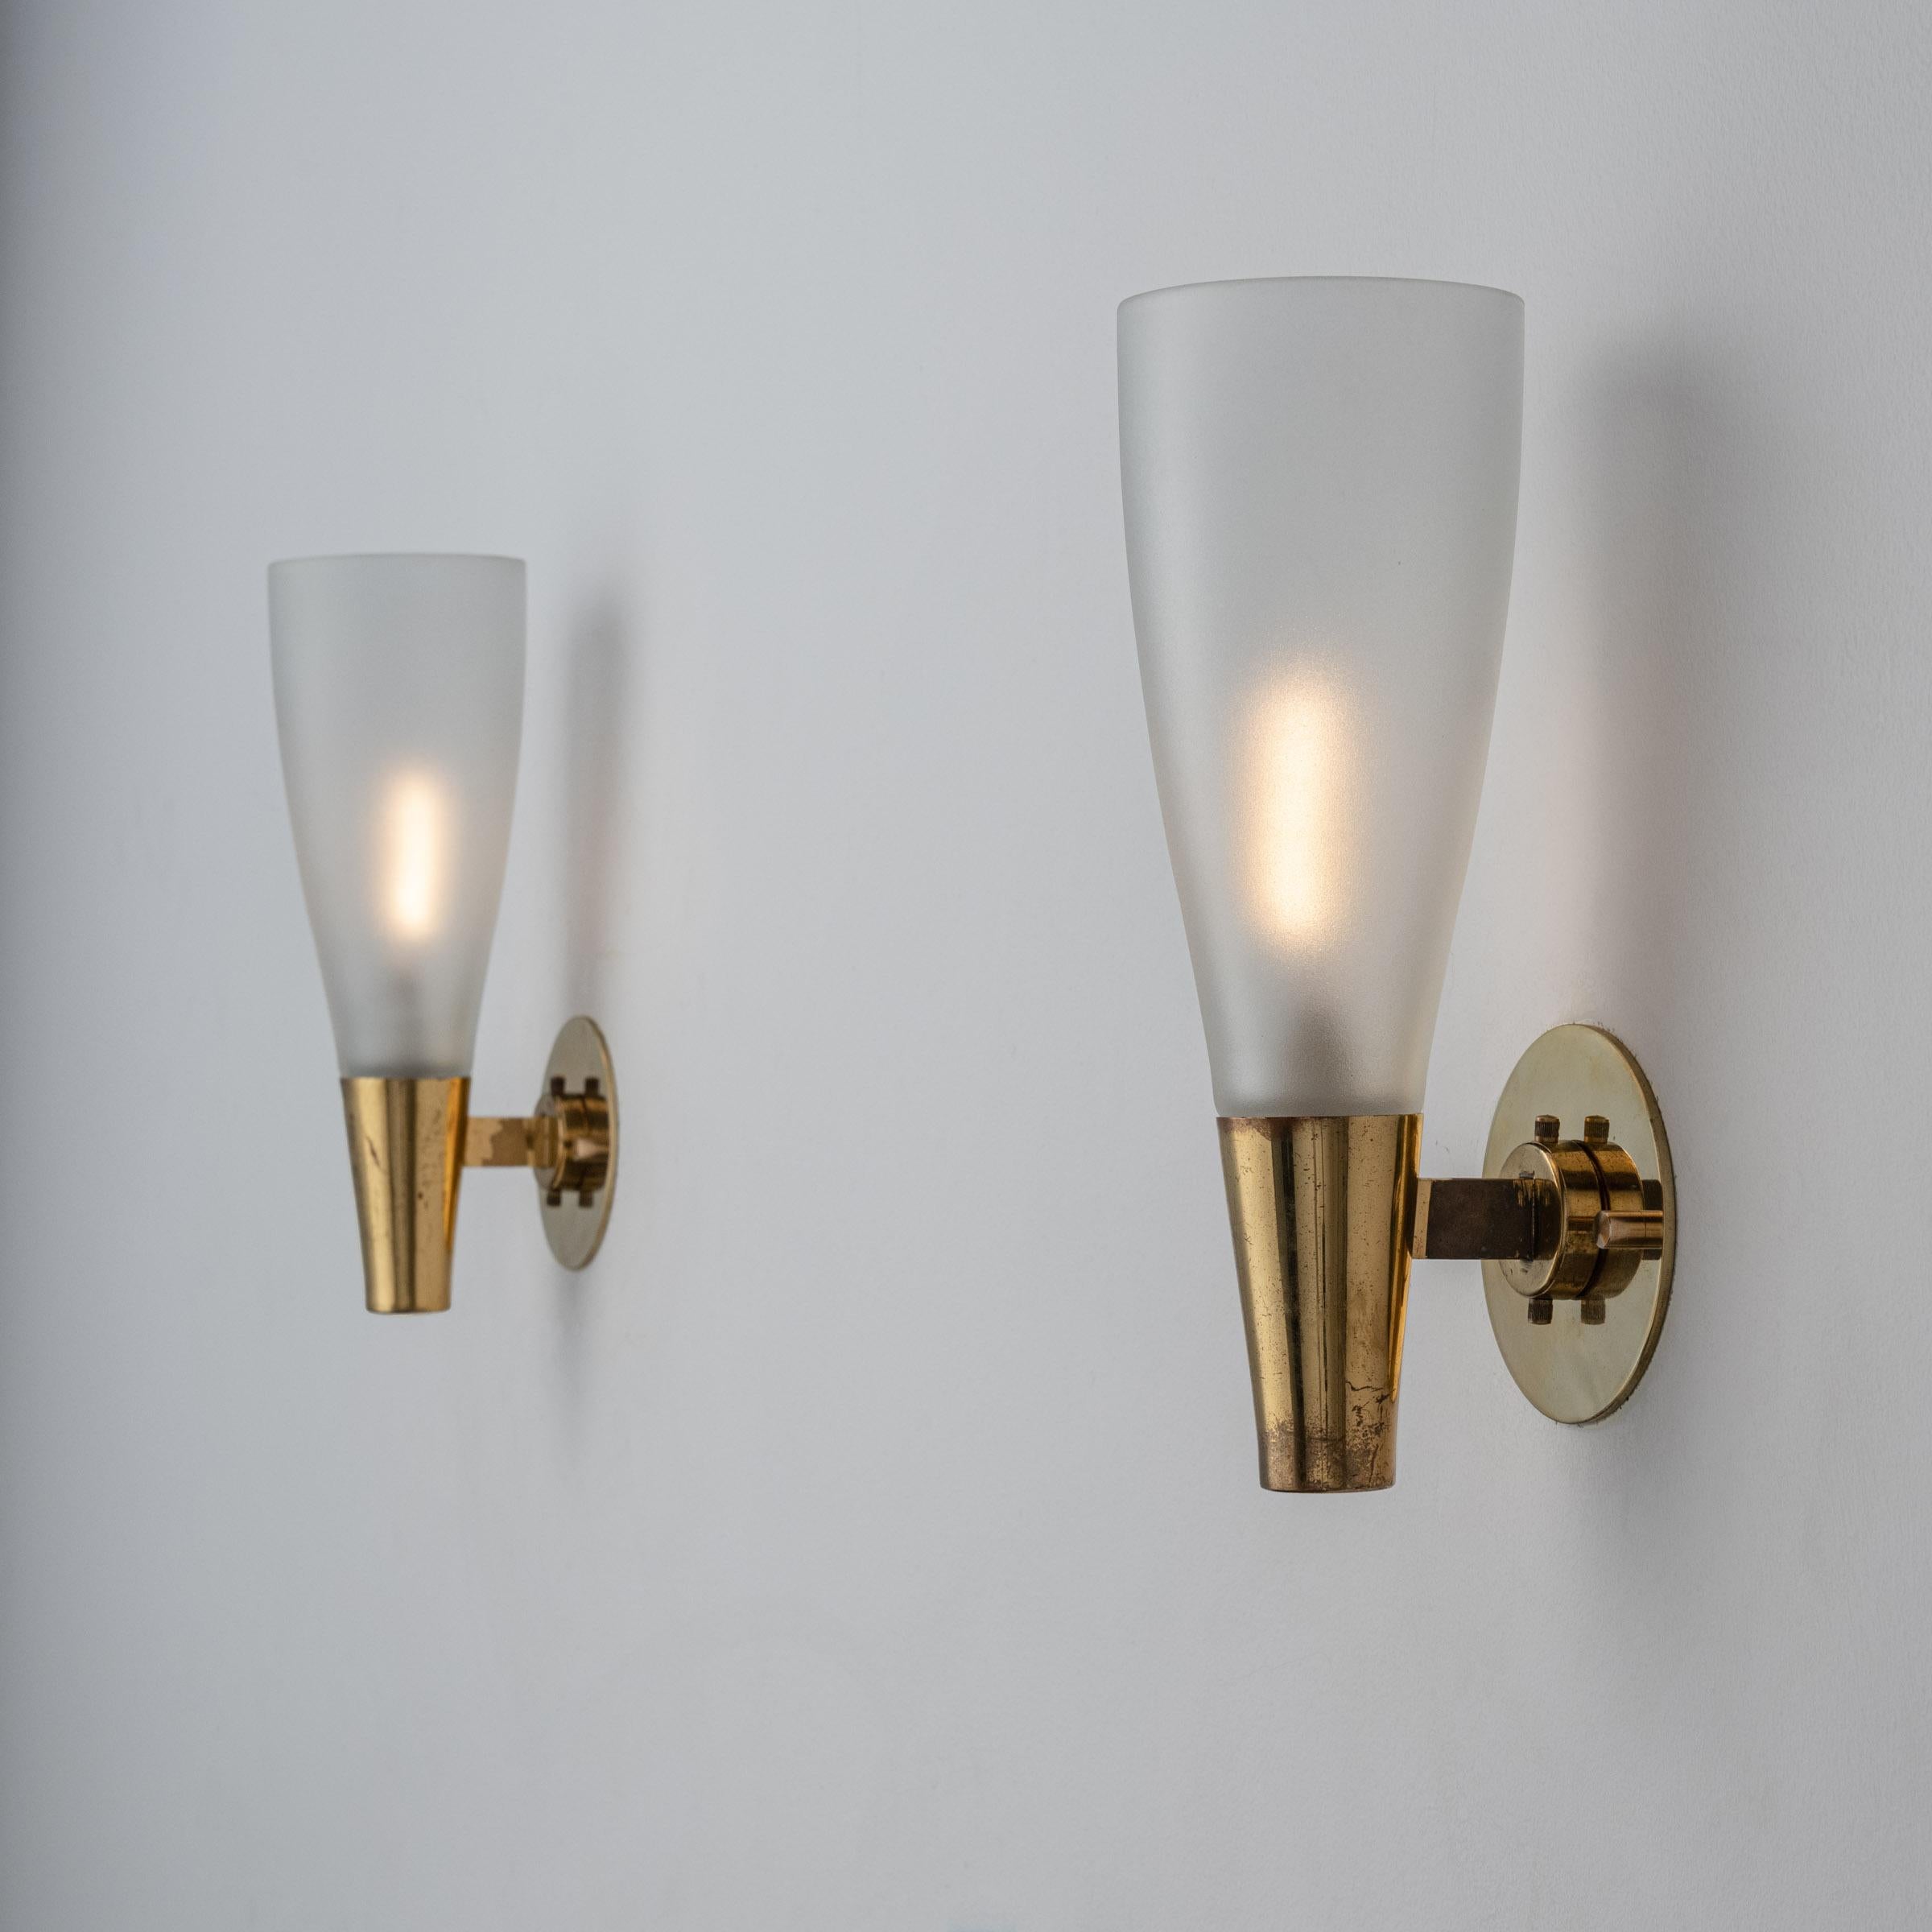 Pair of Model 1537 Sconces by Pietro Chiesa for Fontana Arte. Designed and manufactured in Italy, circa 1950's. Brass, glass. Rewired for U.S. standards. We recommend. Lamping: 120v 2 Qty E14 Sockets with 40w Frosted Bulbs/ Lightbulbs not included.